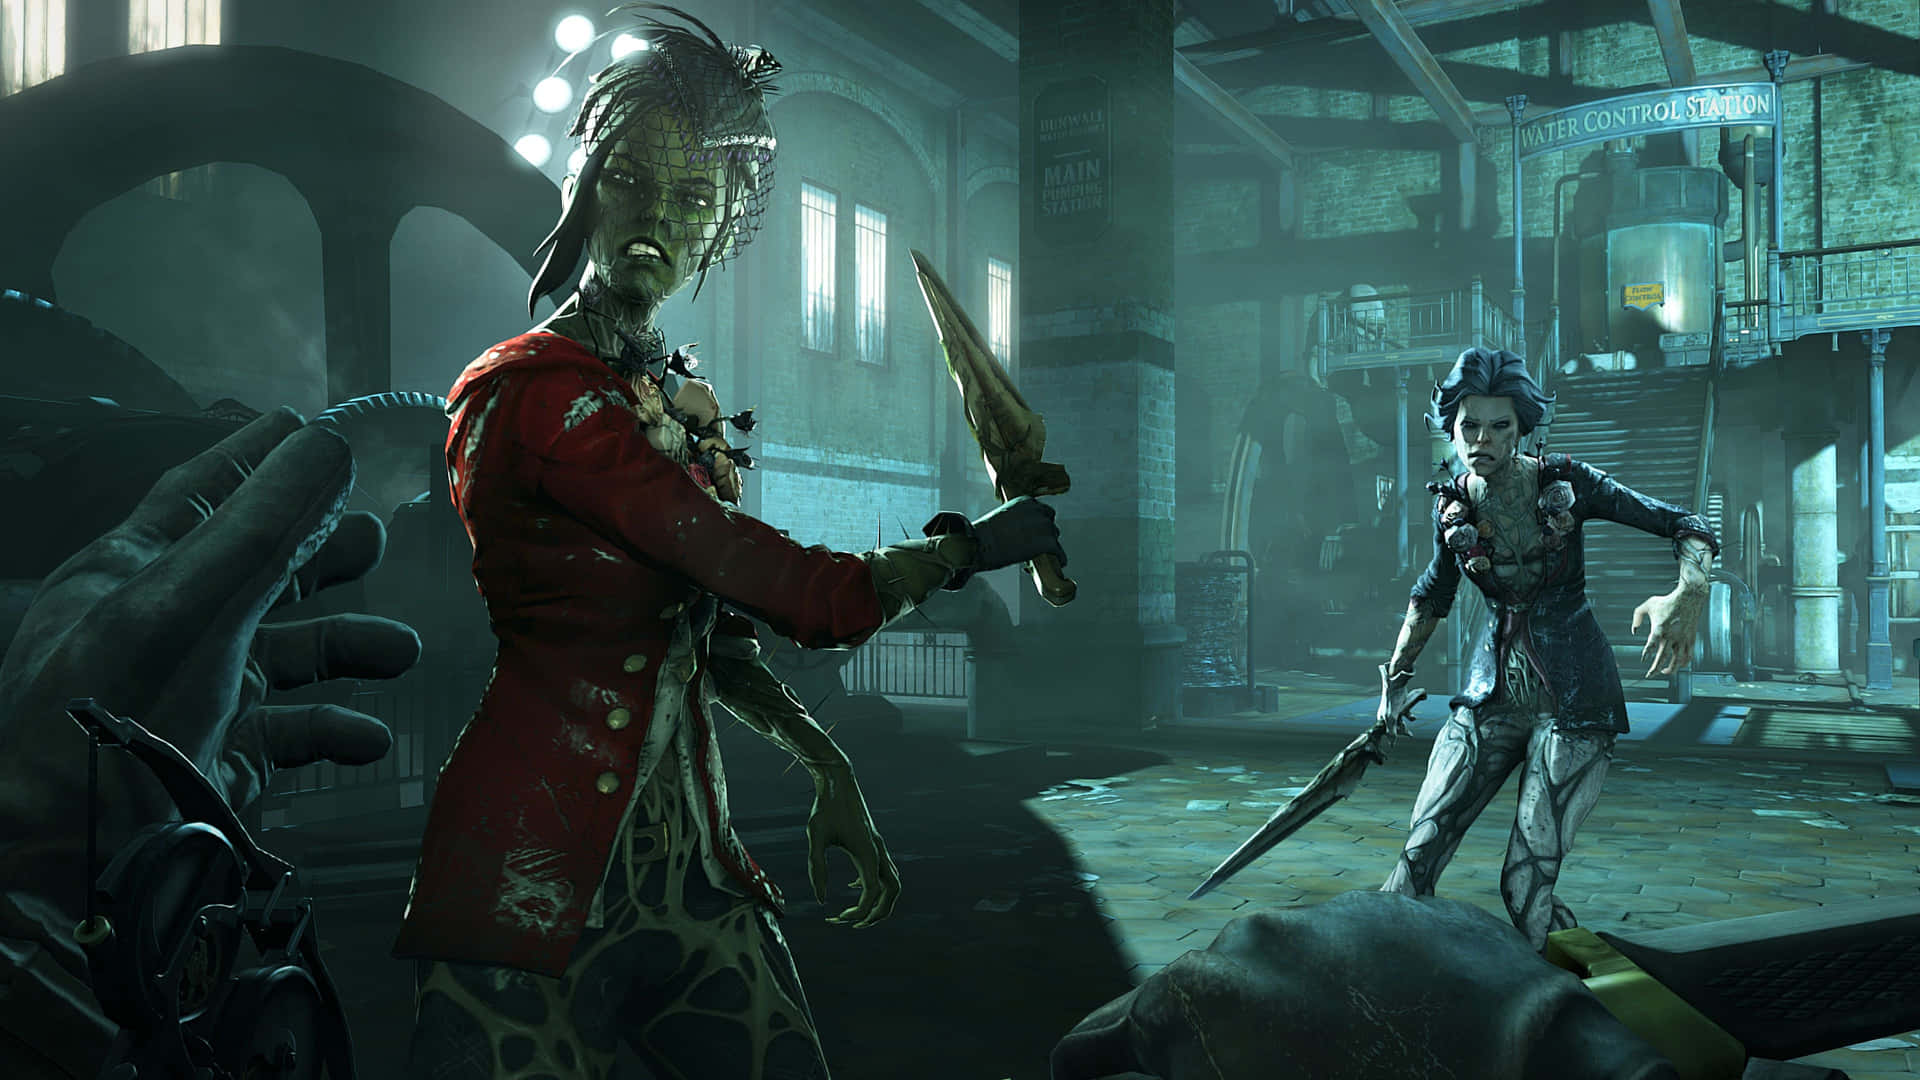 Play Dishonored 4k Wallpaper